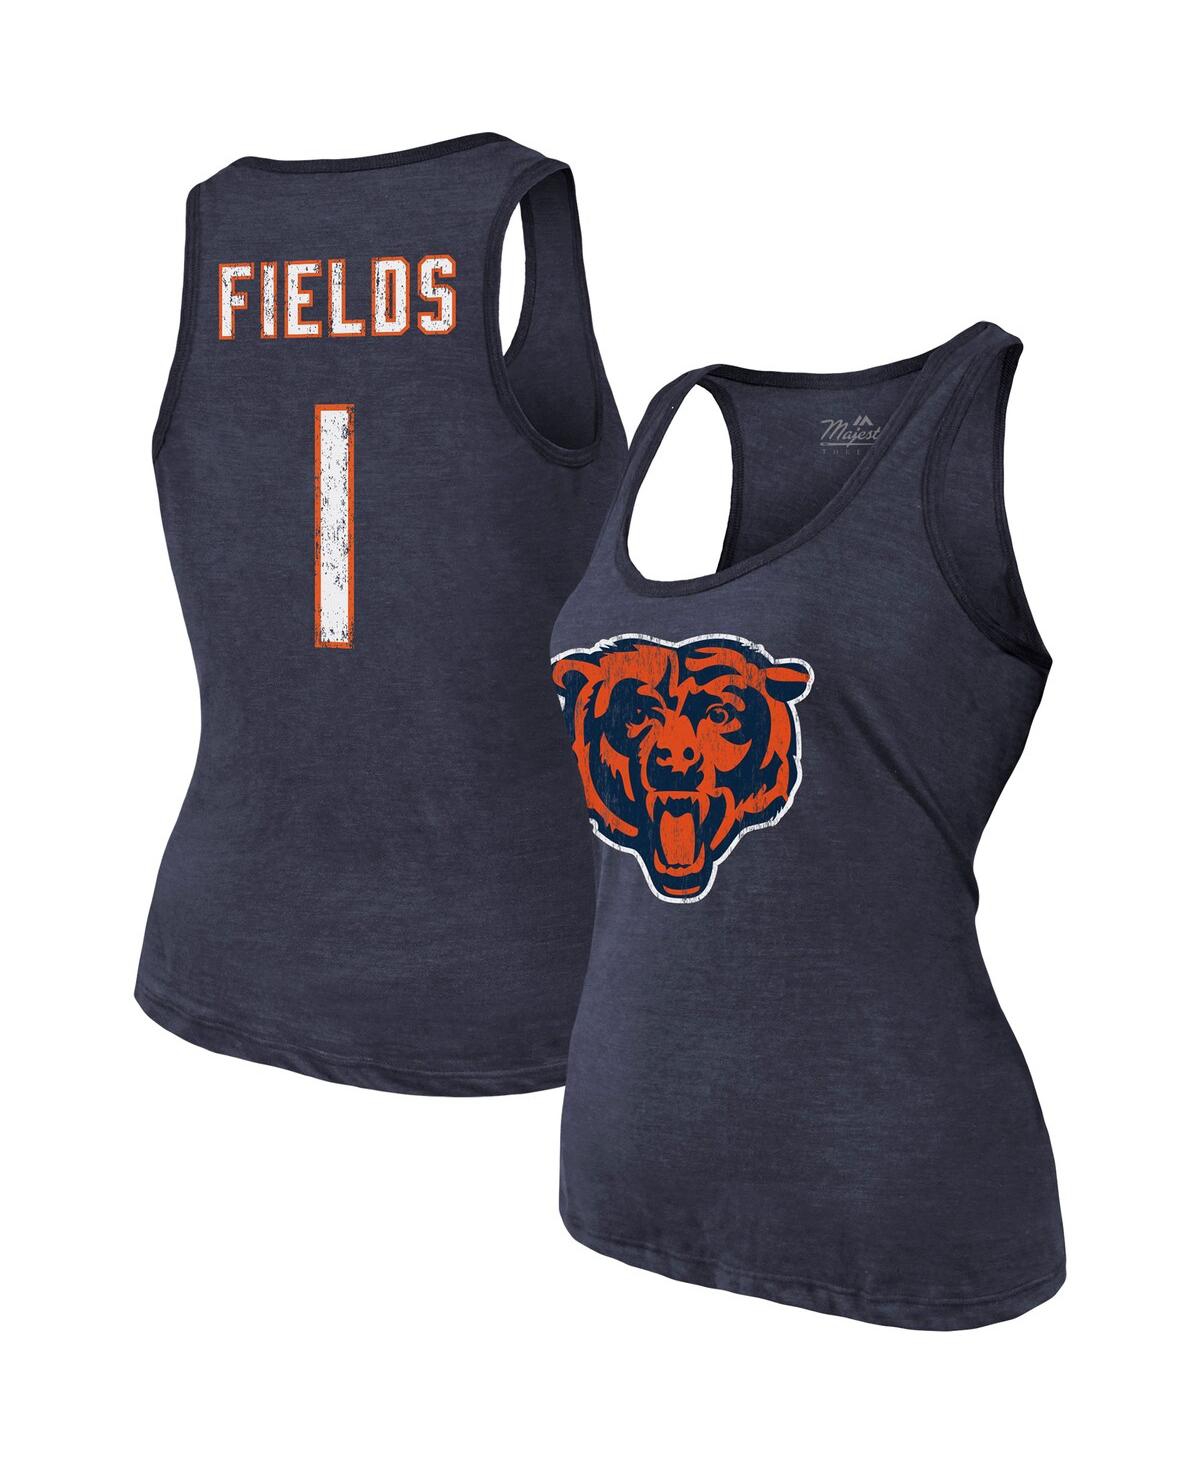 Women's Majestic Threads Justin Fields Navy Chicago Bears Player Name and Number Tri-Blend Tank Top - Navy